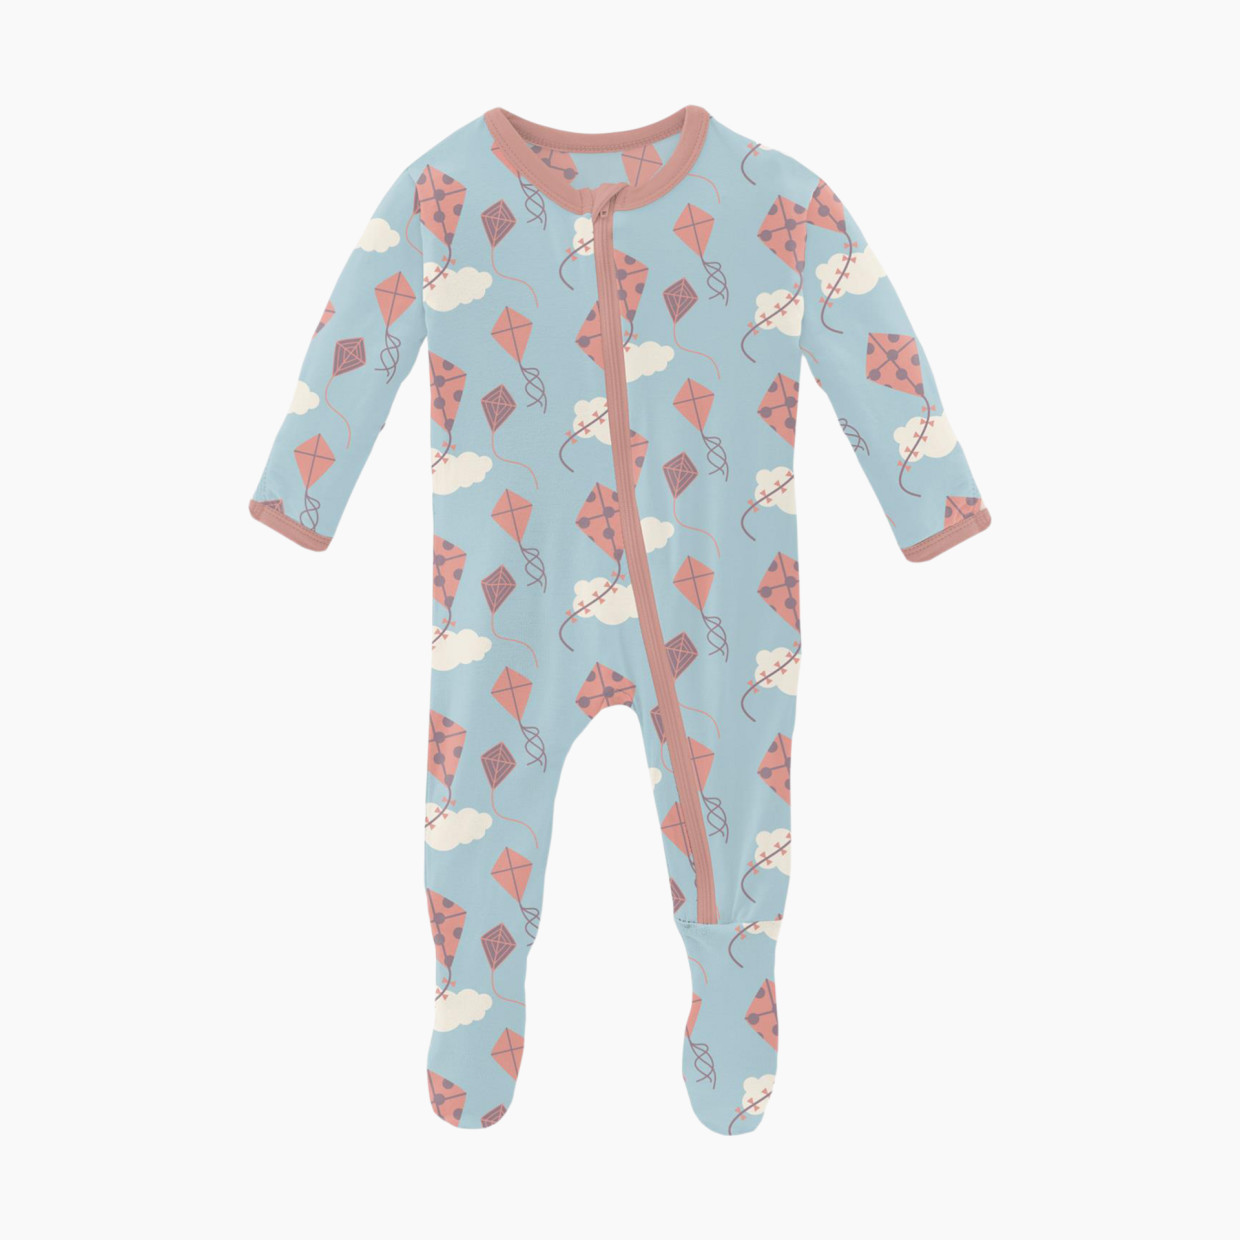 KicKee Pants Print Footie with Zipper - Spring Day Kites, 0-3 Months.